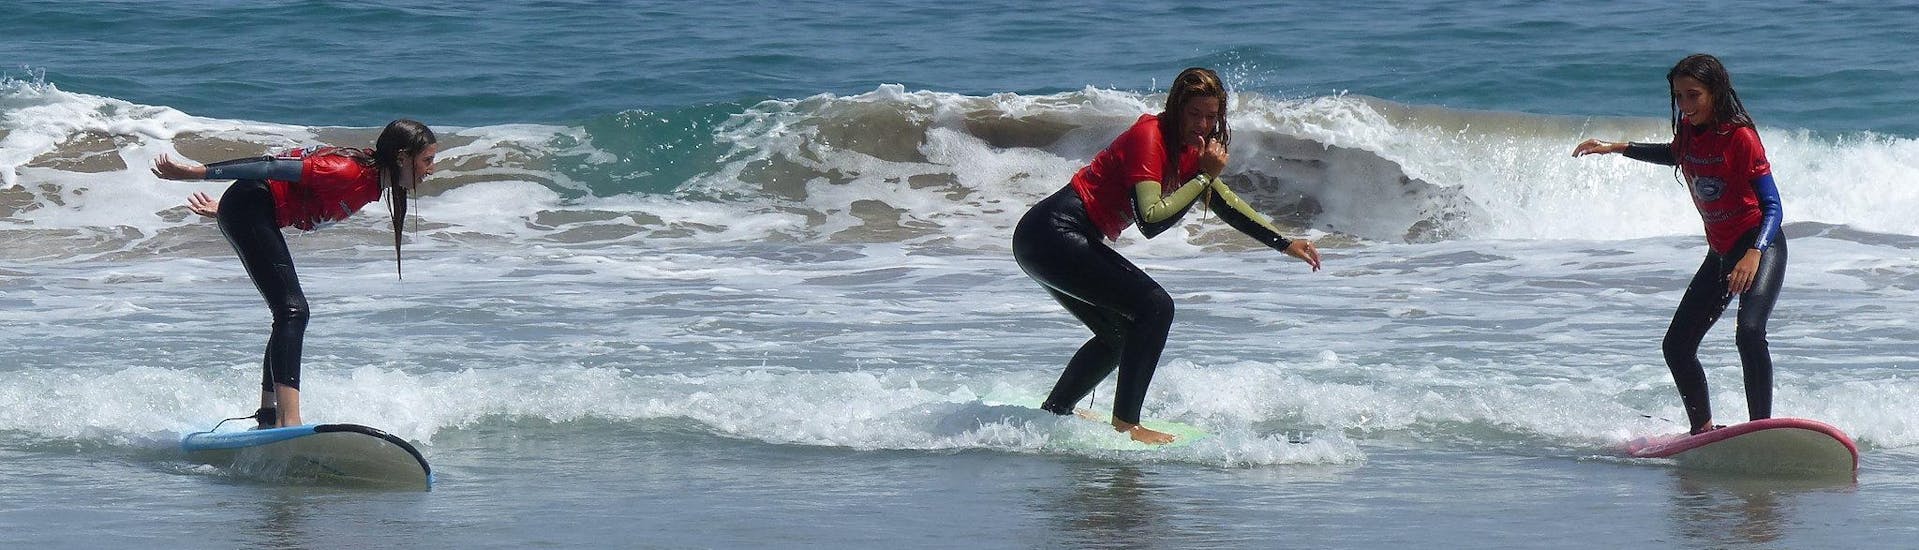 half-day-surfing-lessons-for-kids-adults-all-levels-calima-surf-school-hero